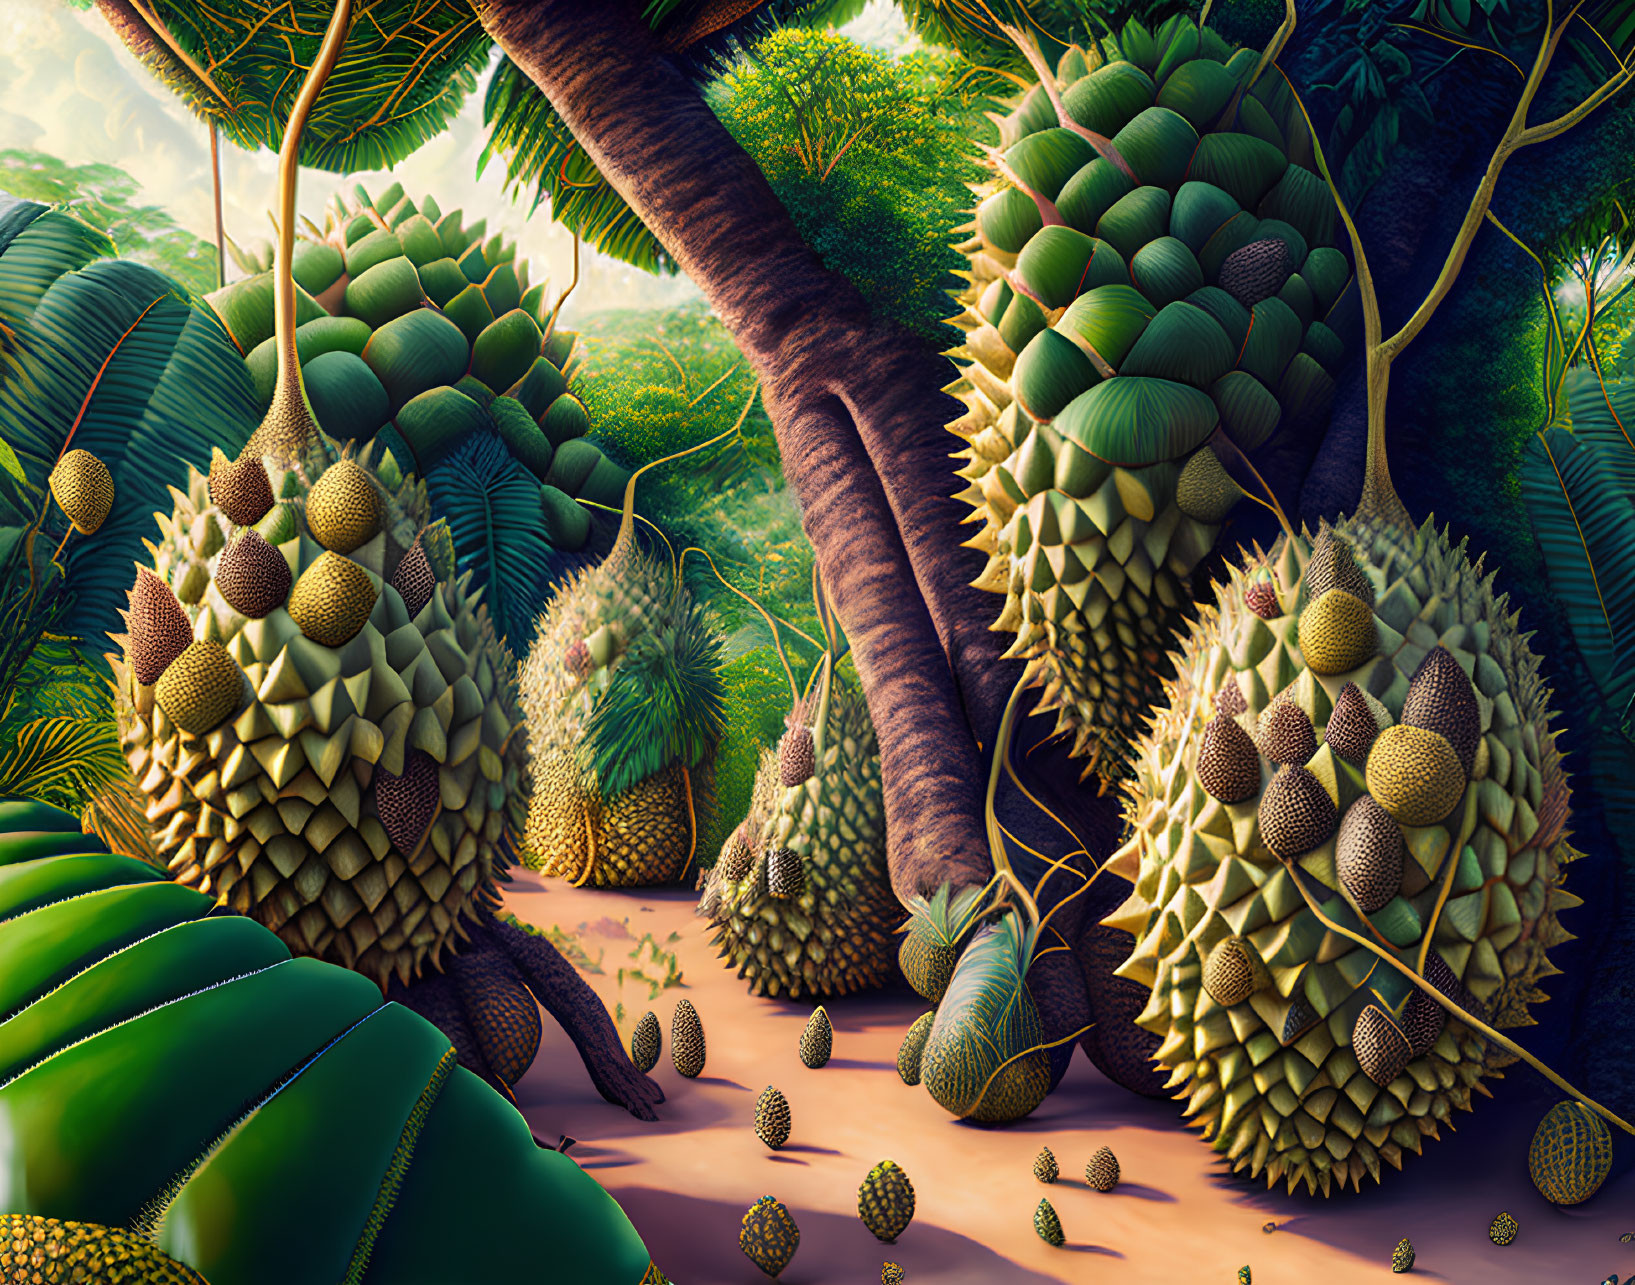 Surreal Landscape with Oversized Durian Fruits in Lush Jungle